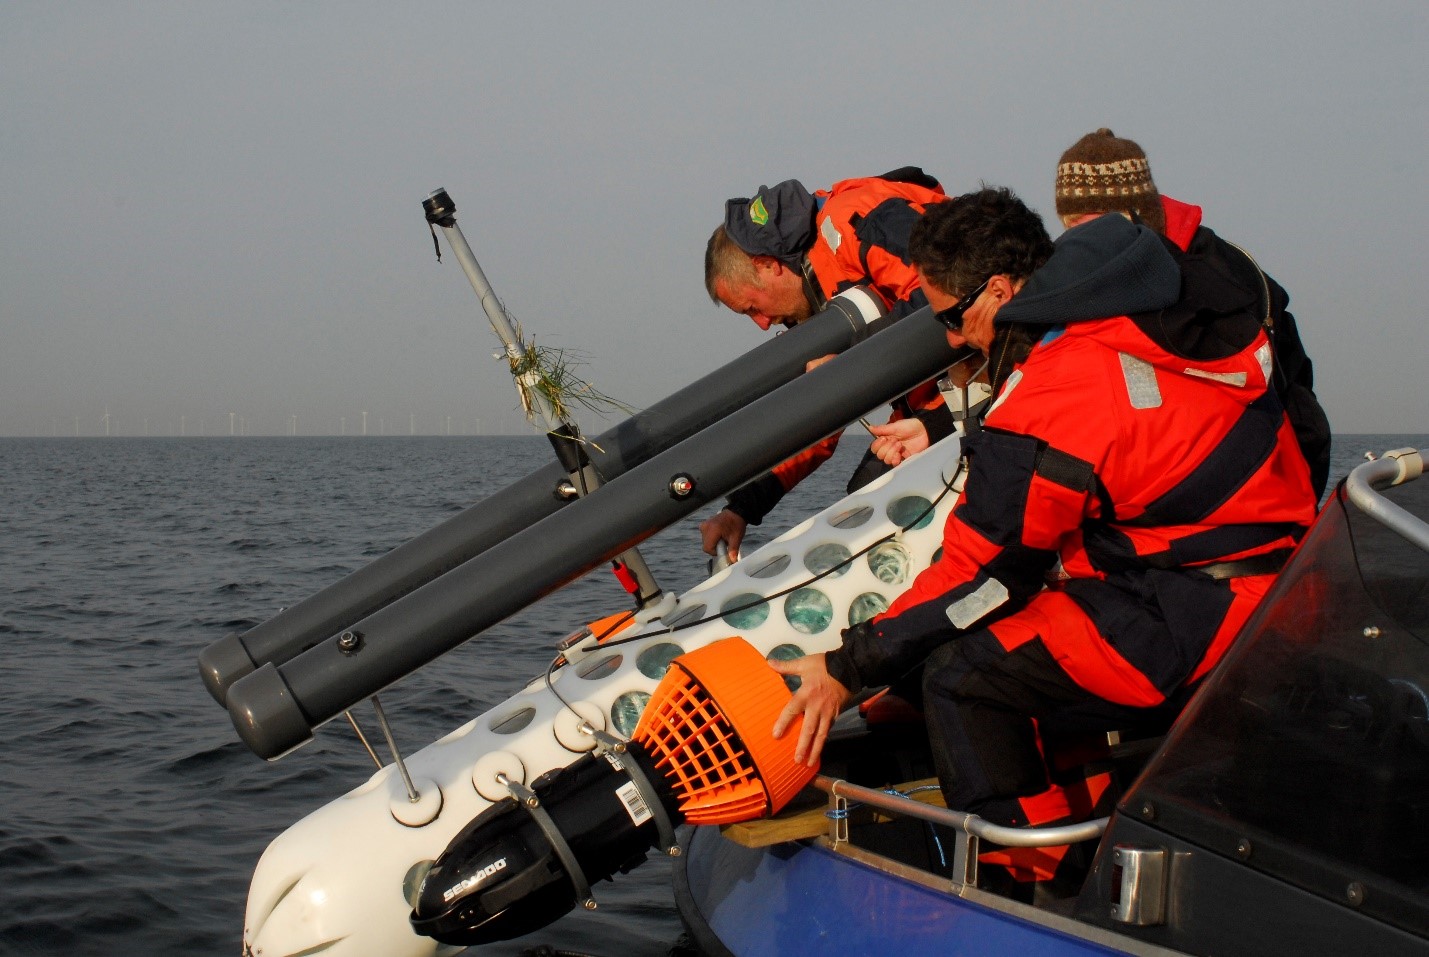 Safe deployment of the Net Submarine some 500m from the suspicious seals at Rødsand haul out site in 2009.